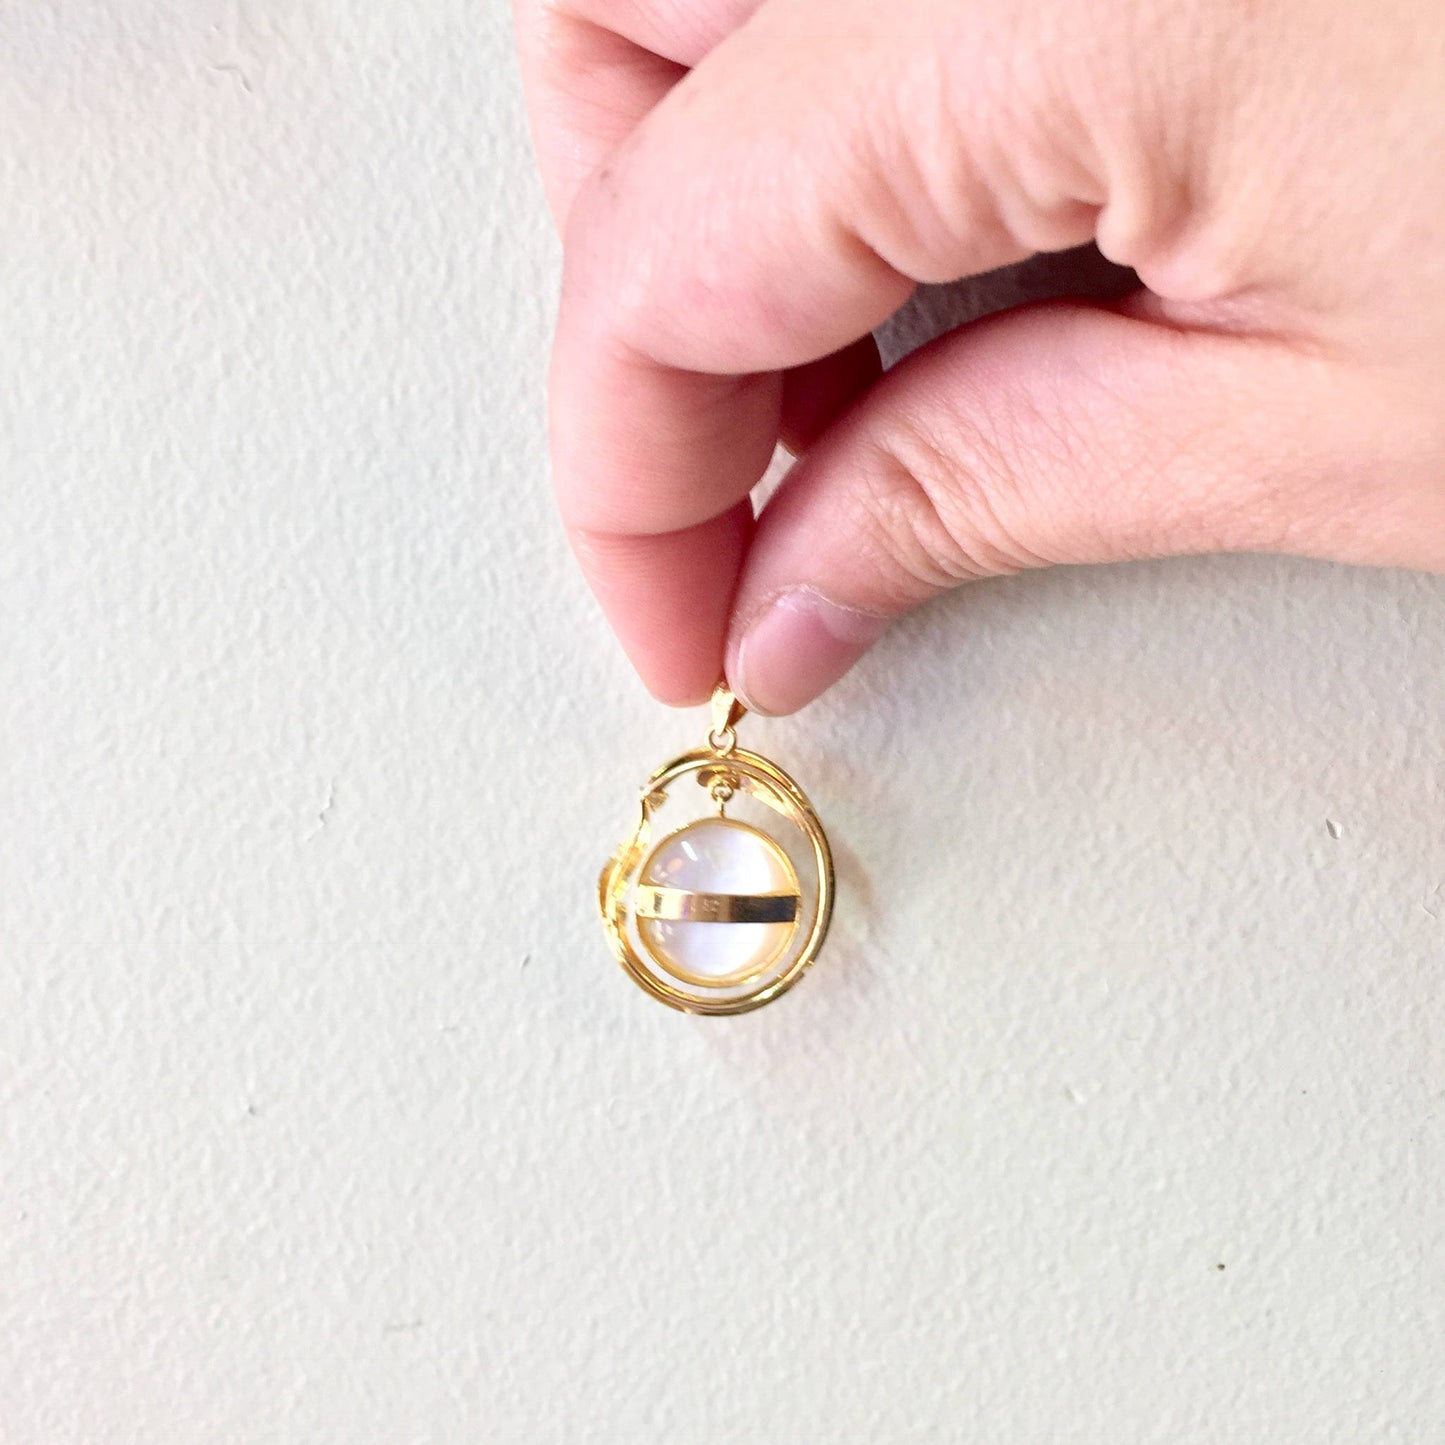 A hand holding a gold vintage-style pendant with a round pearl accent, against a white background.